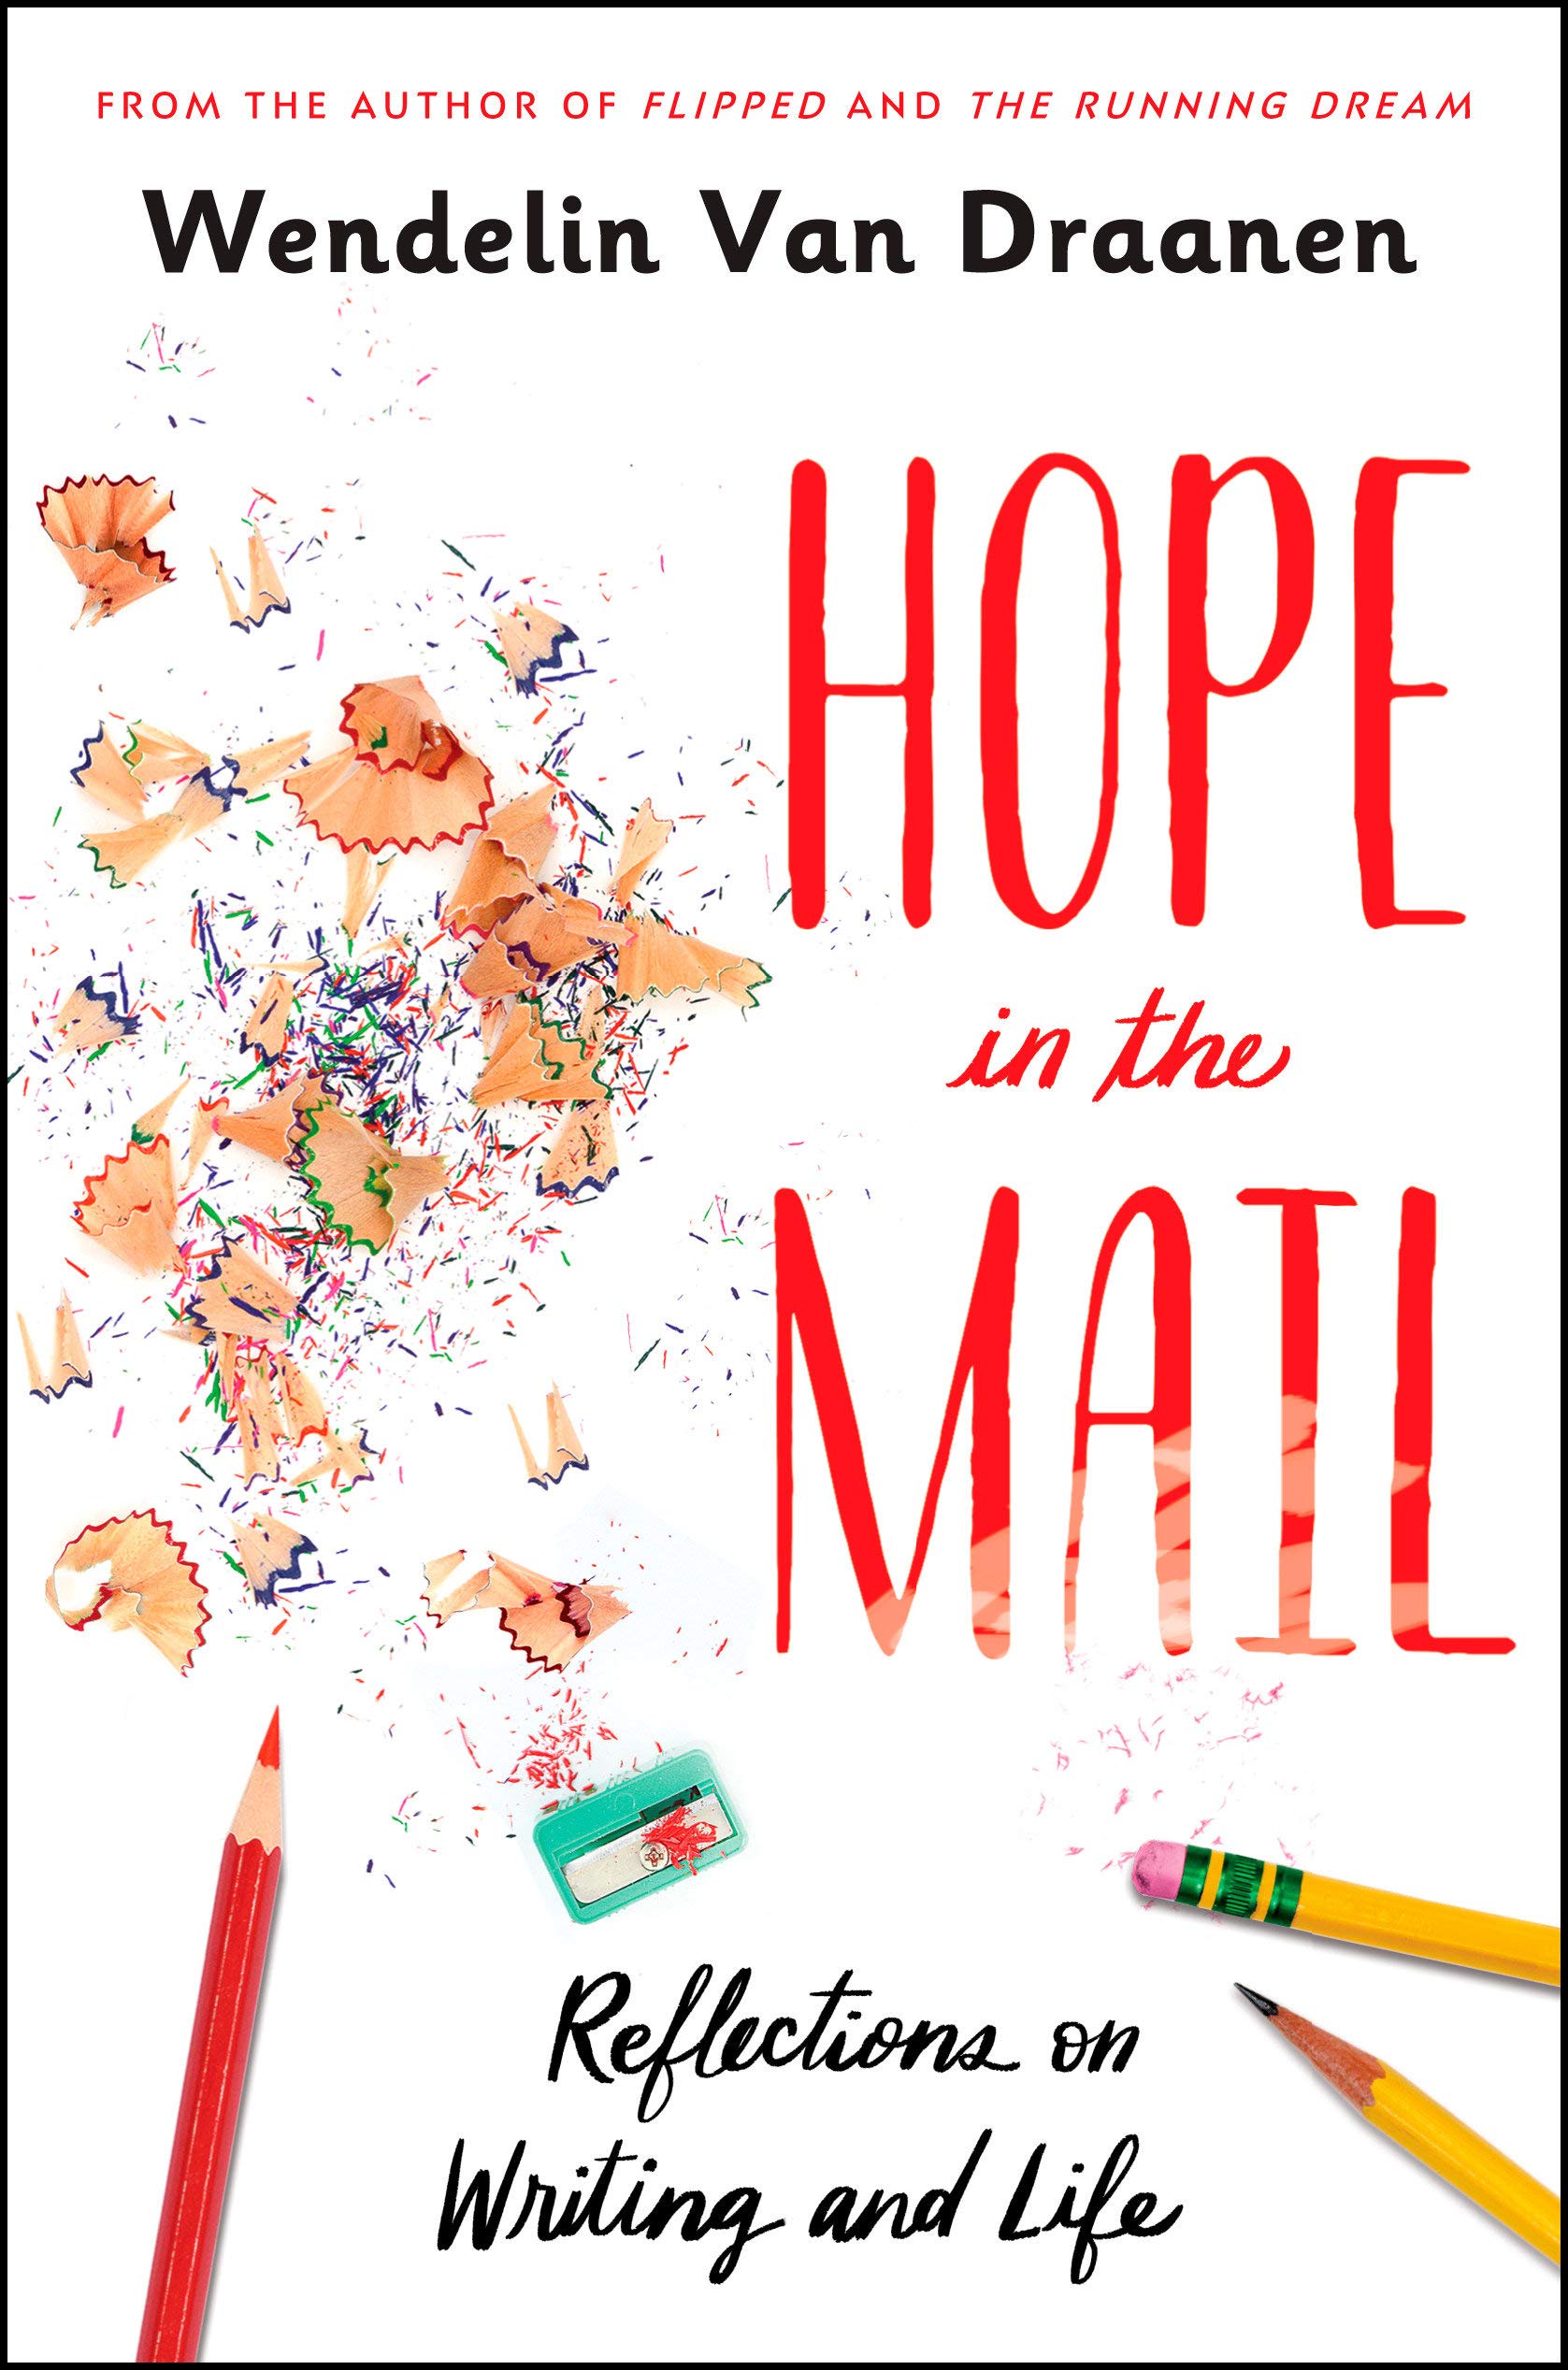 An image of the book cover for "Hope in the Mail: Reflections on Writing and Life" by Wendelin Van Draanen. The cover shows the title in red and has three pencils at the bottom of the image, one red pencil and two regular pencils. There is a pencil sharpener between the pencils, and pencil shavings scattered across the image.